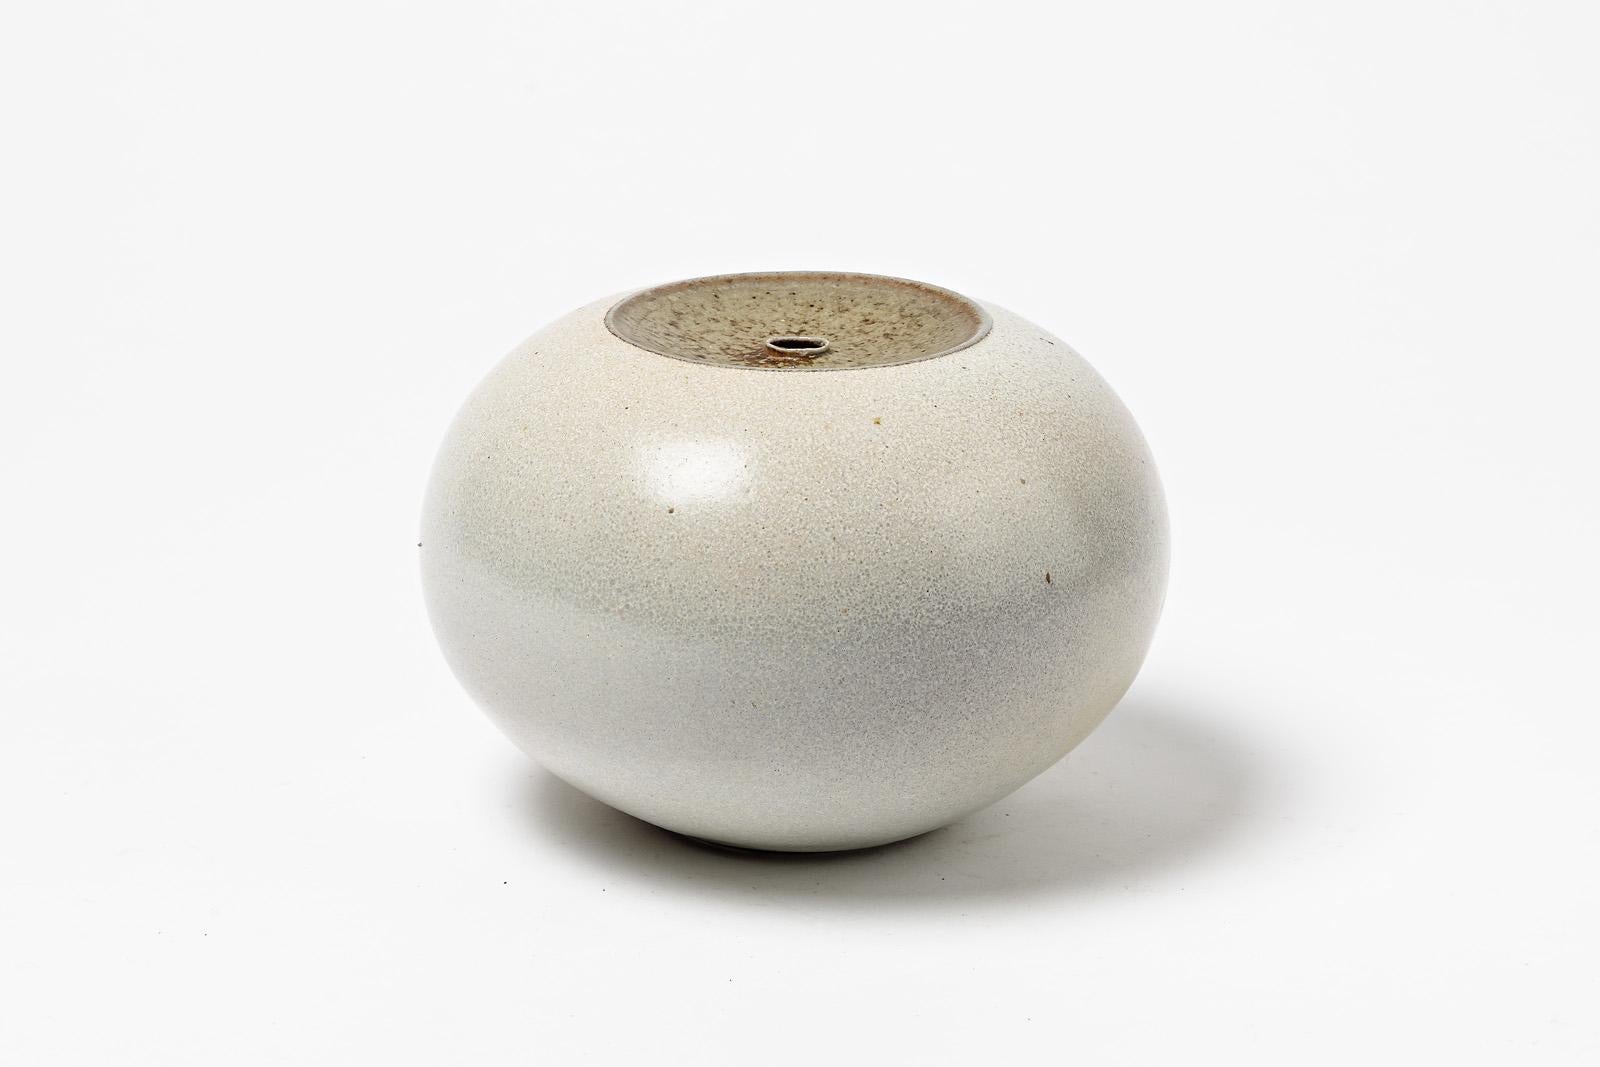 Claude Champy

Stoneware ceramic vase with white and grey ceramic colors.

Elegant bowl form, handmade production. 

Signed under the base CHAMPY

Measures: Height 13cm, large 16cm.